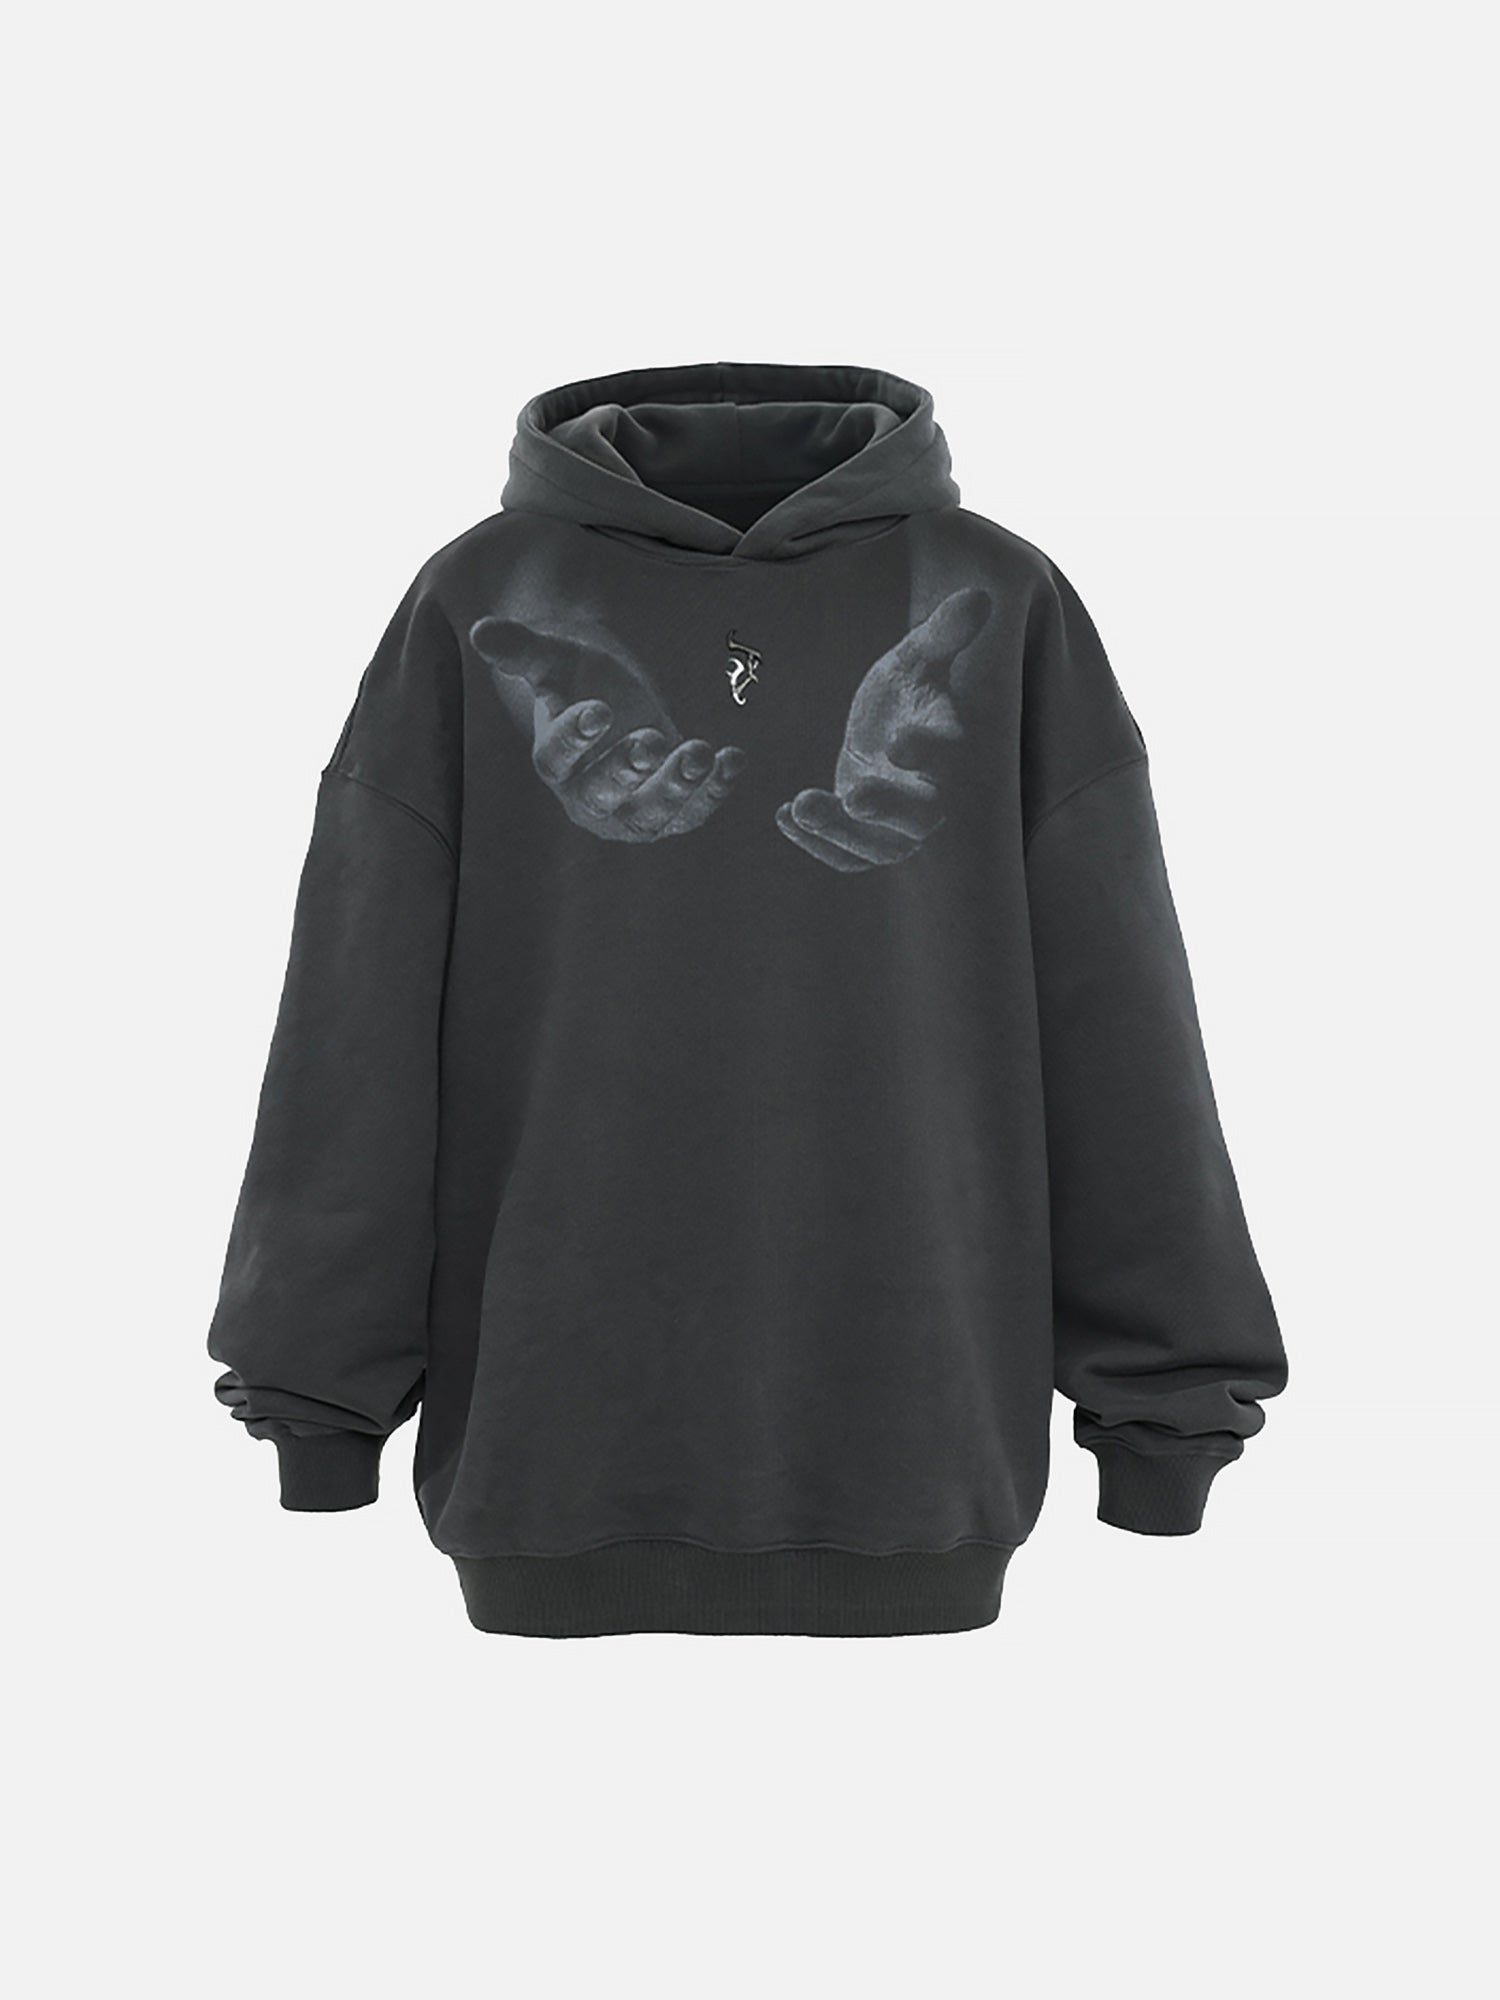 Thesupermade Monogram Embroidered Hand Print Hoodie - 1876